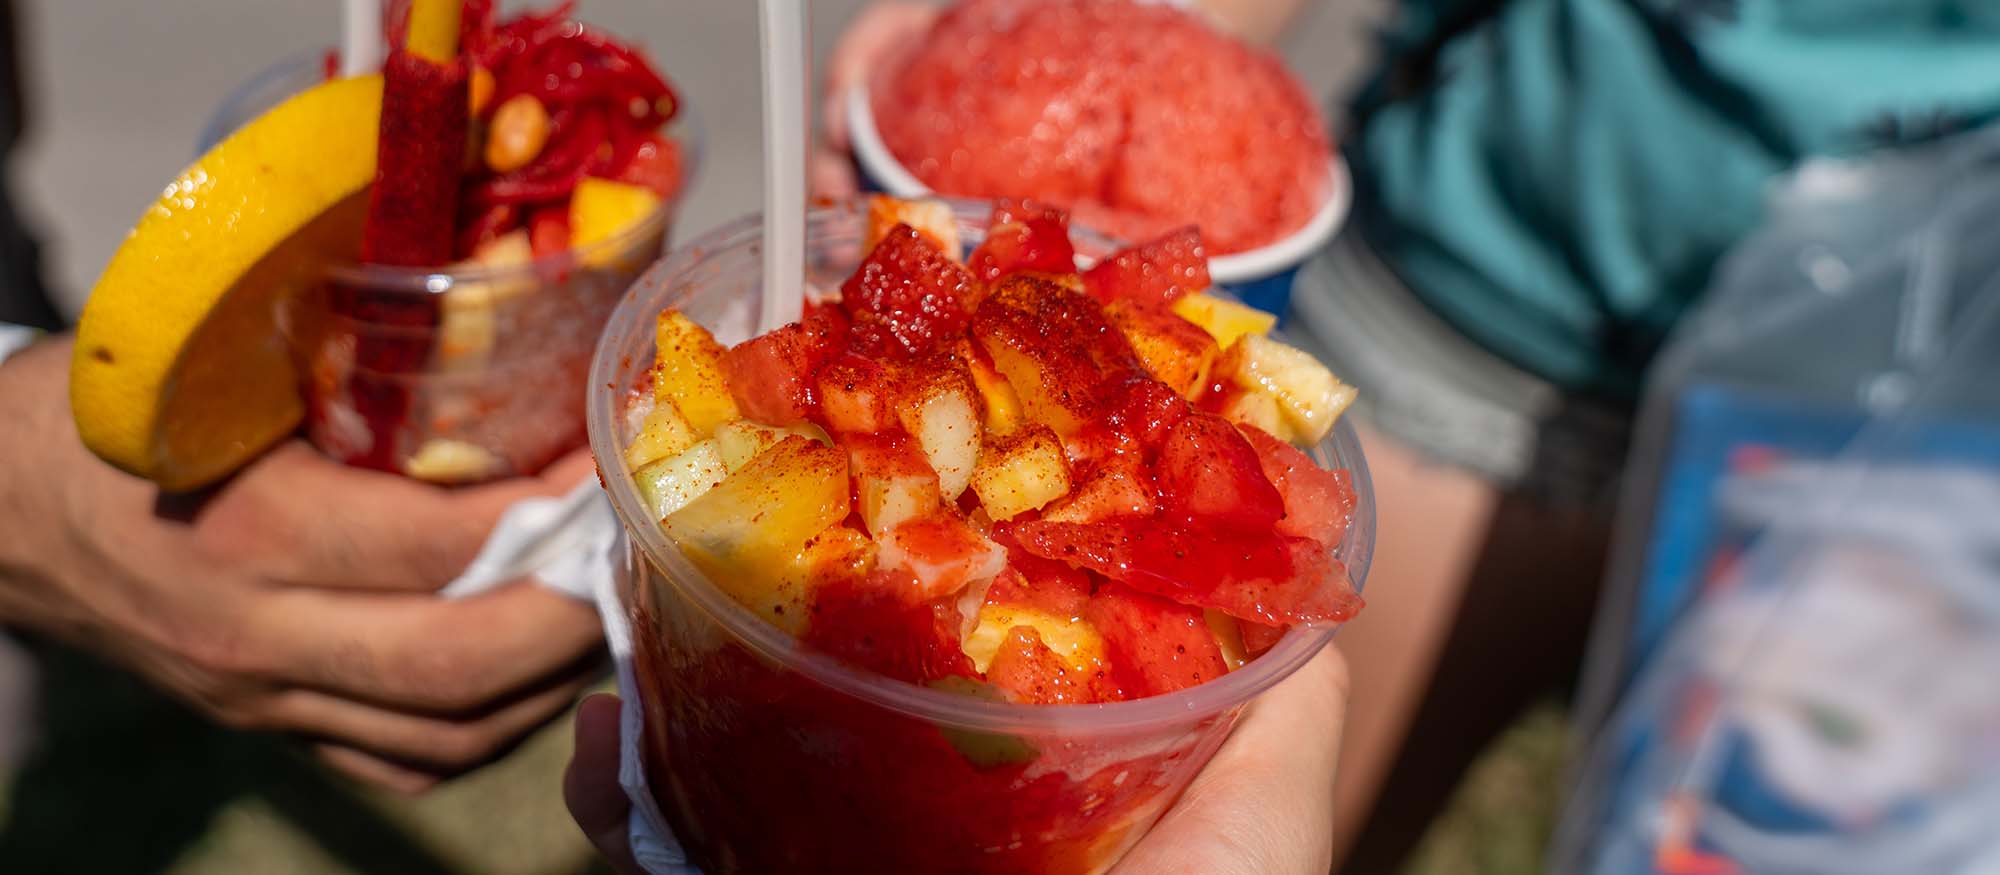 Close up picture of a strawberry snow cone and two different types of mangonadas.